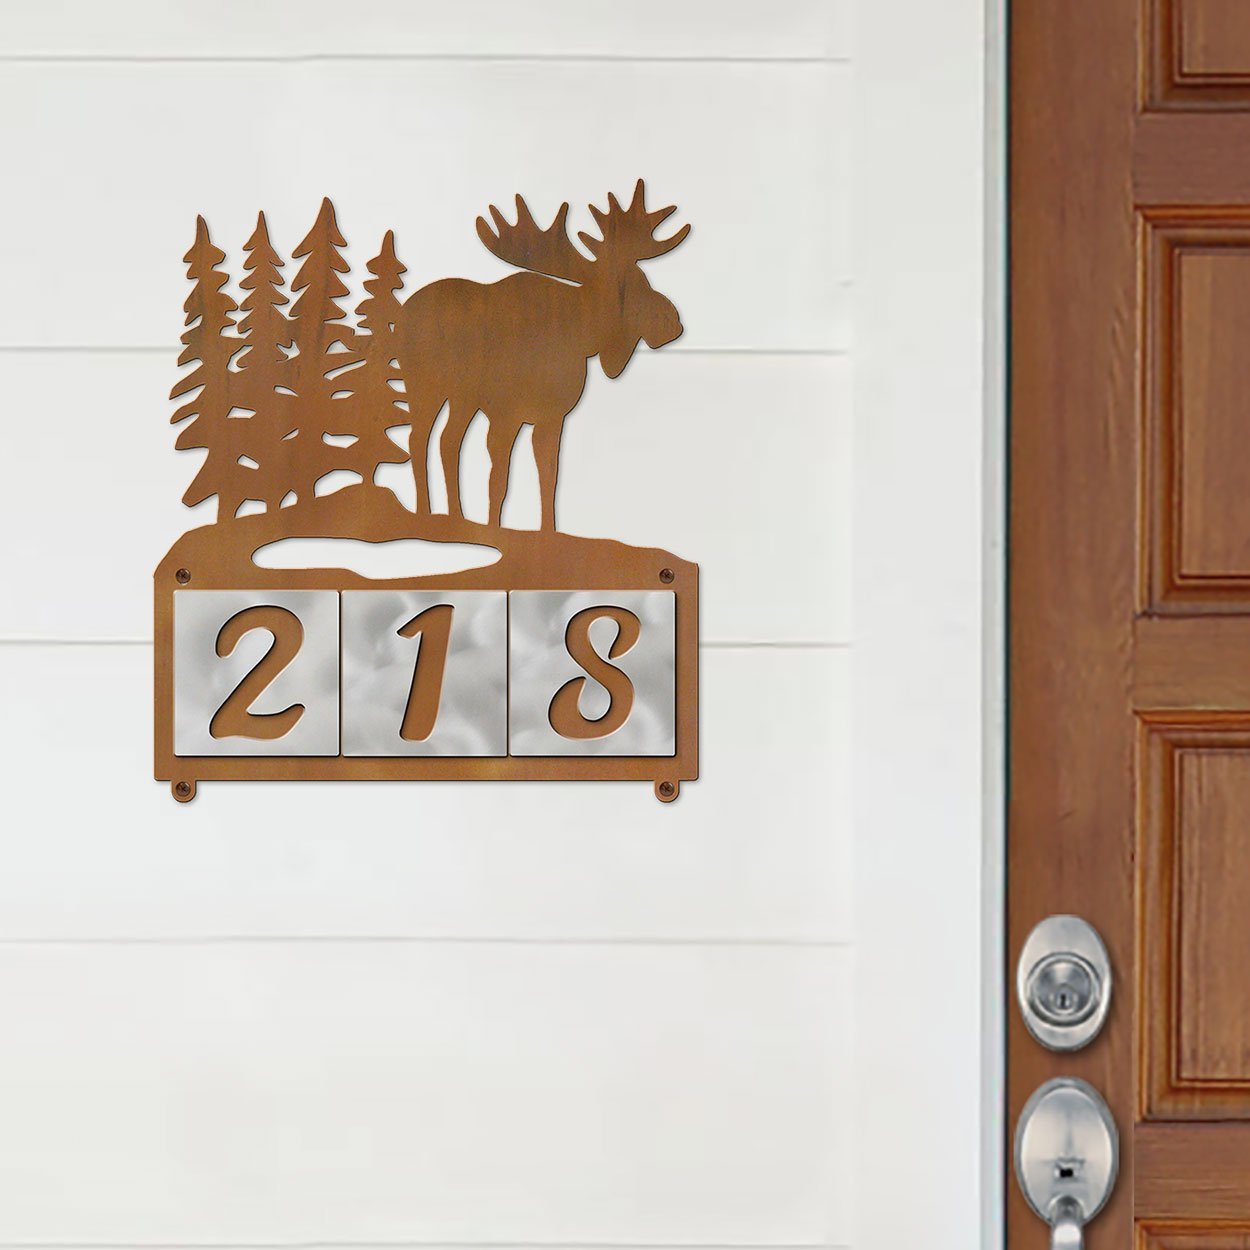 607213 - Moose in the Woods Design 3-Digit Horizontal 4-inch Tile Outdoor House Numbers